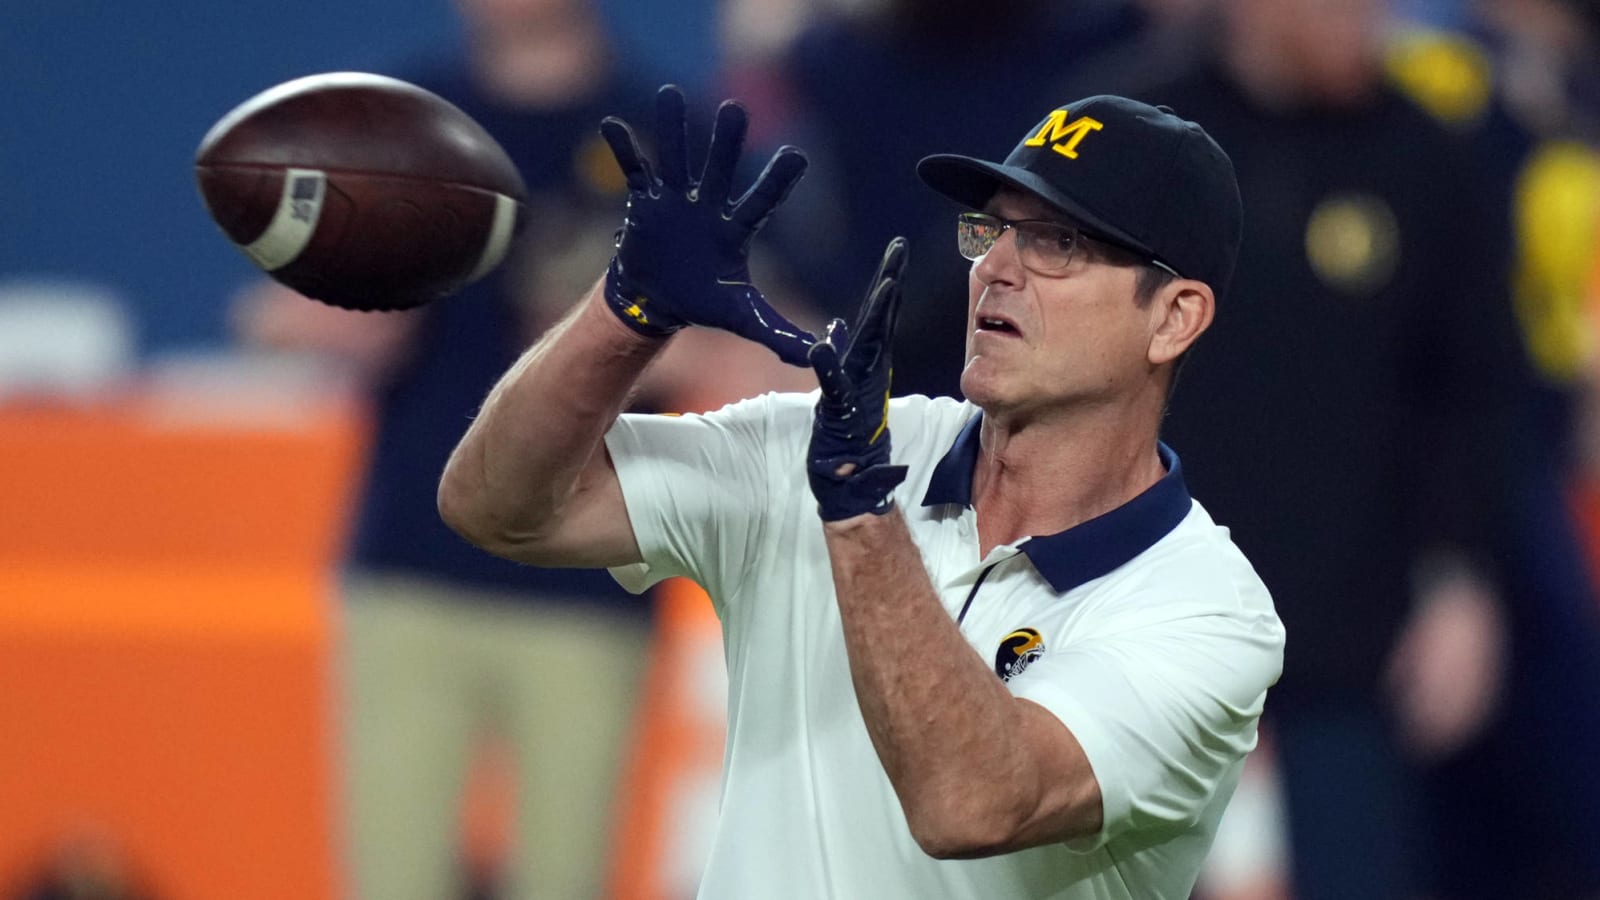 Watch: Jim Harbaugh was so fired up ahead of playoff semifinal